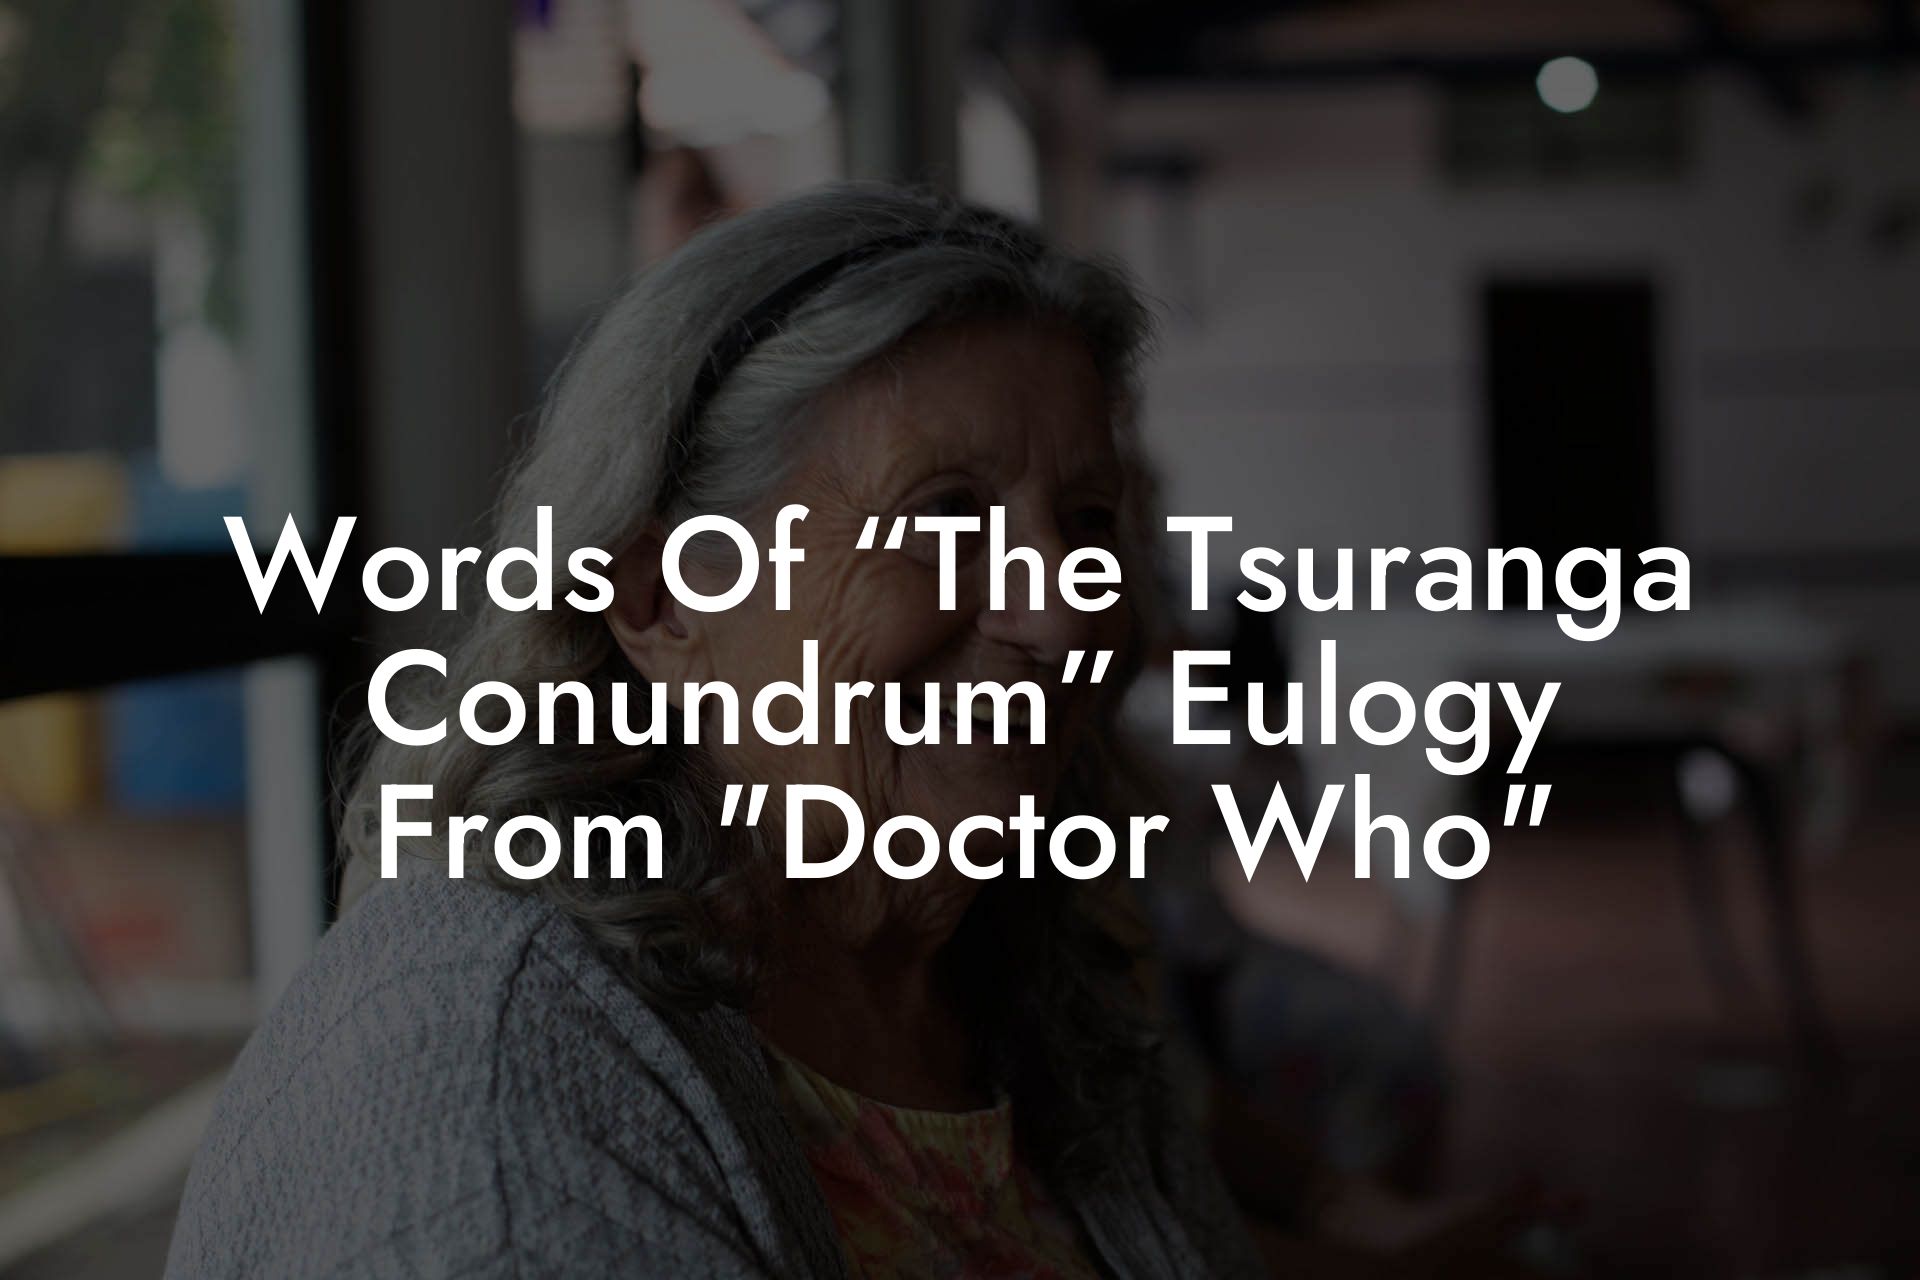 Words Of “The Tsuranga Conundrum” Eulogy From "Doctor Who"